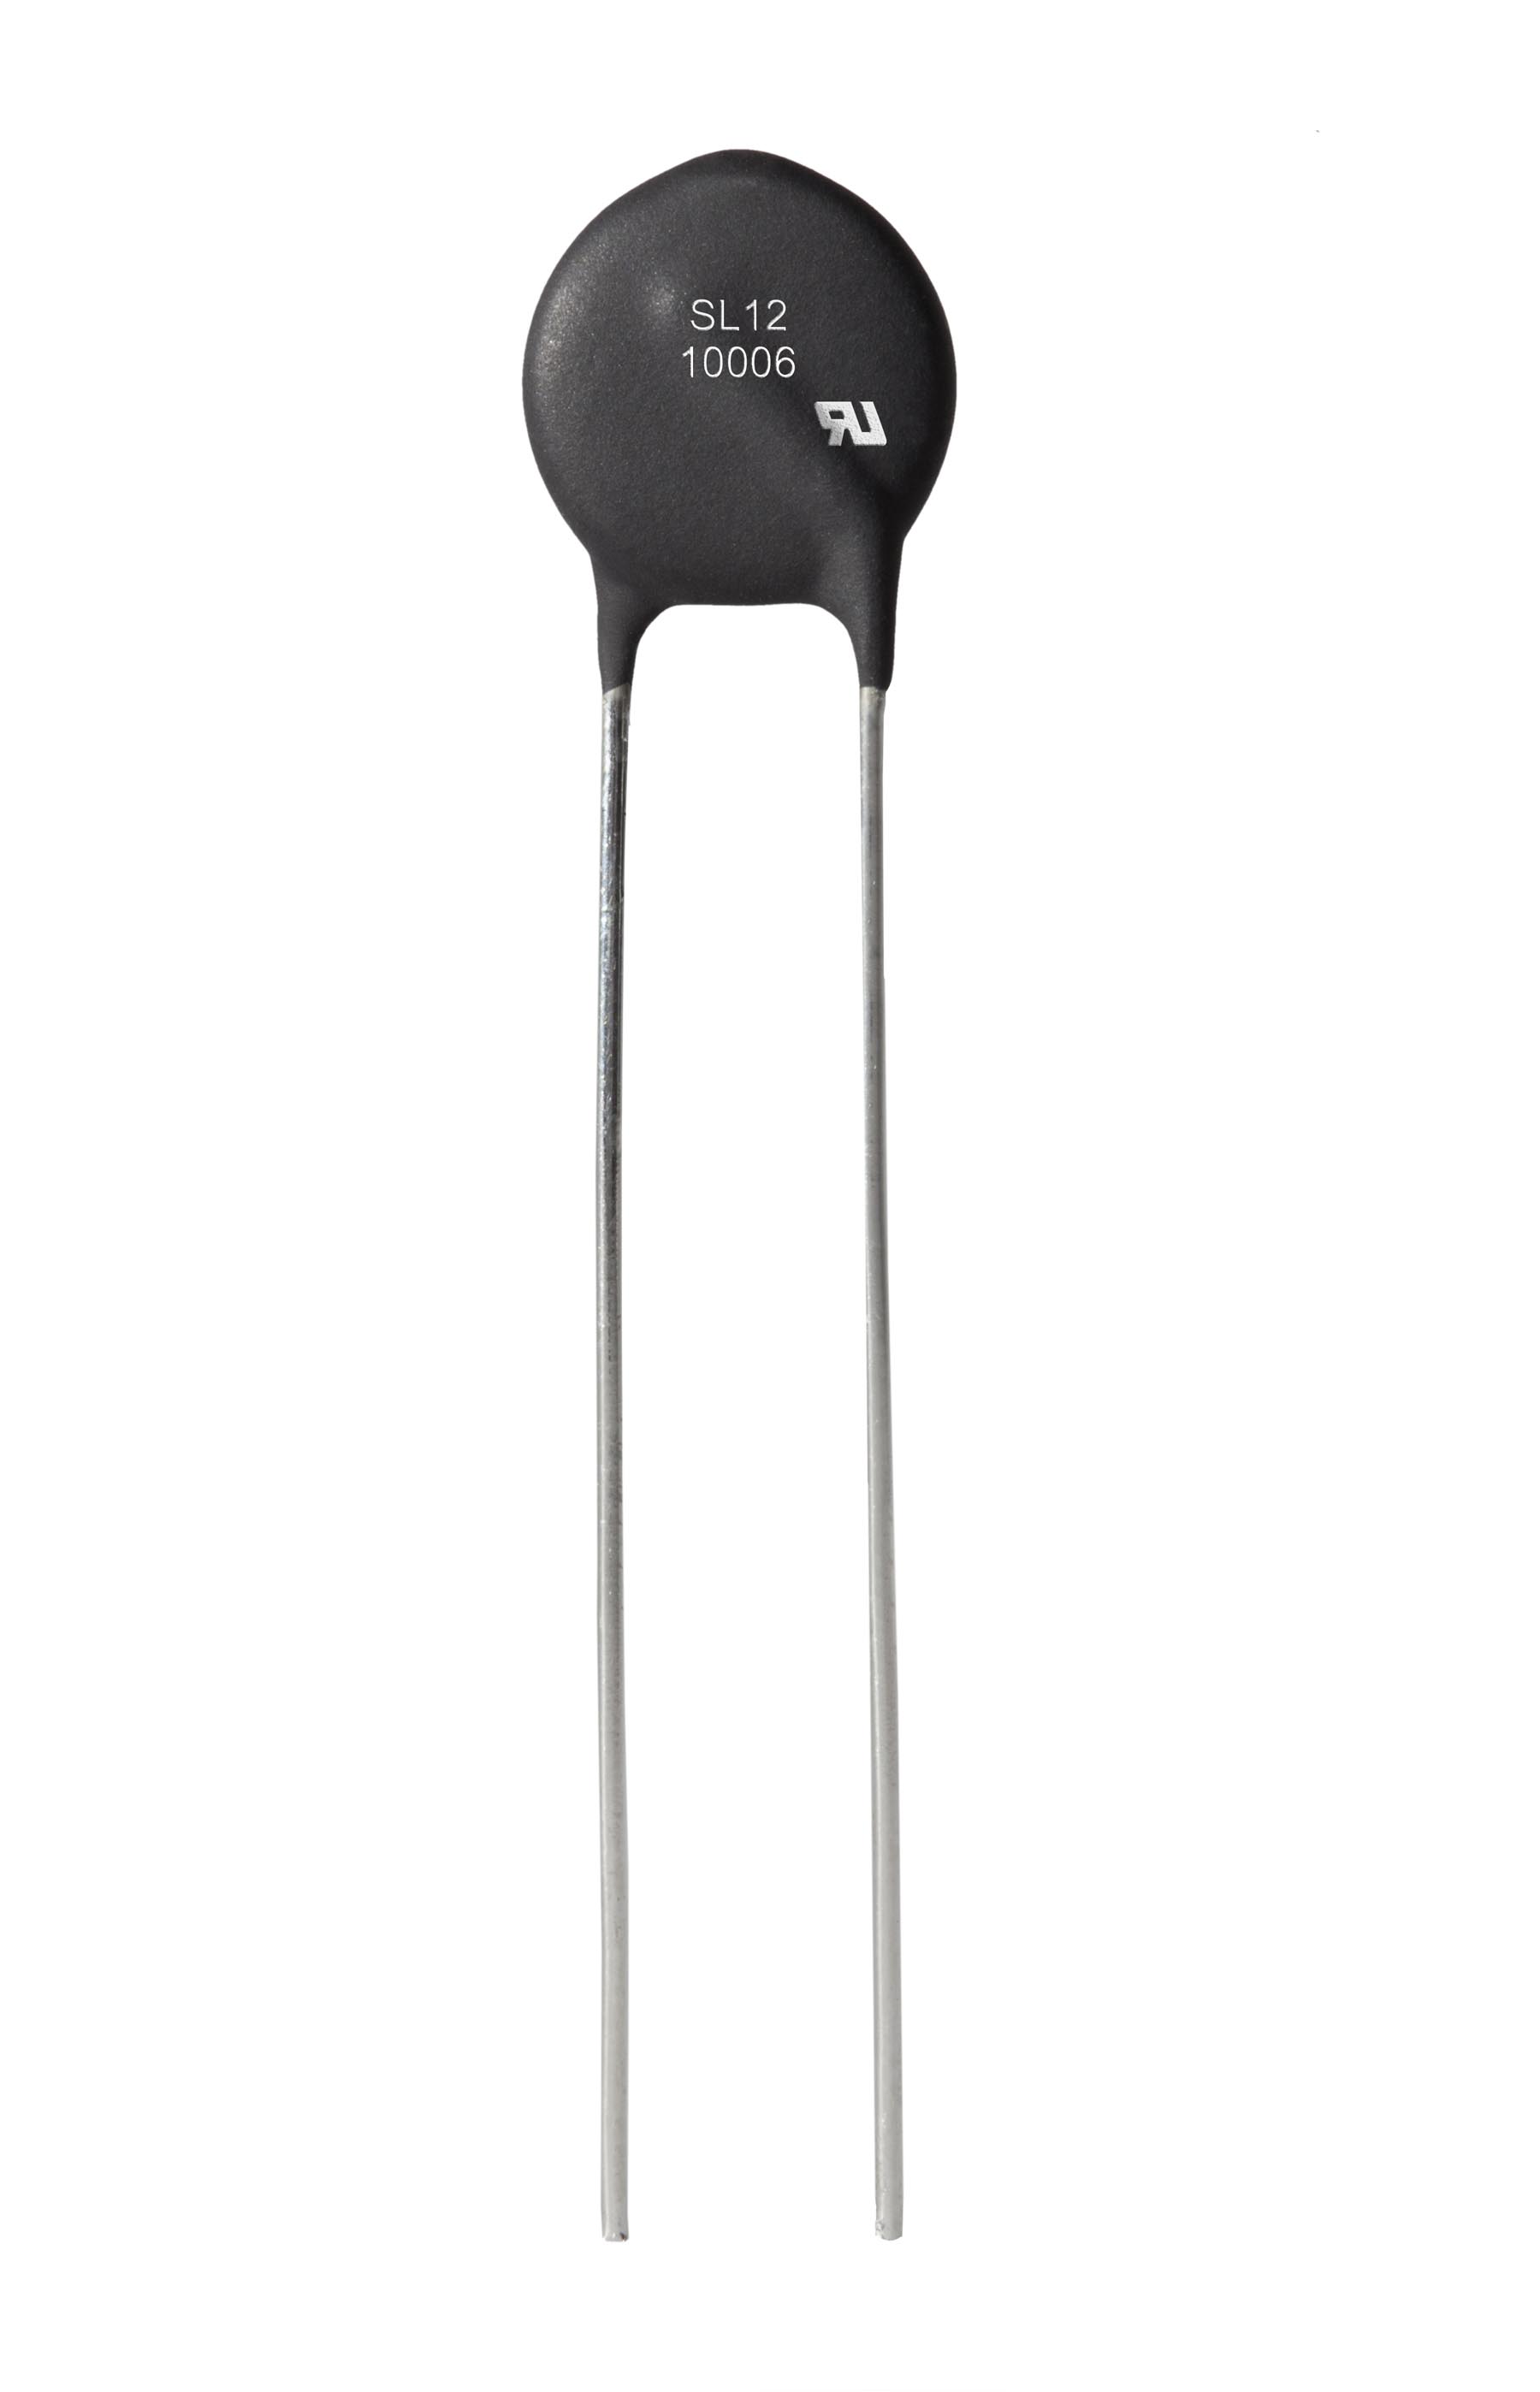 Thermistor Delivers Current to 6.0 A and Energy Ratings to 40 J